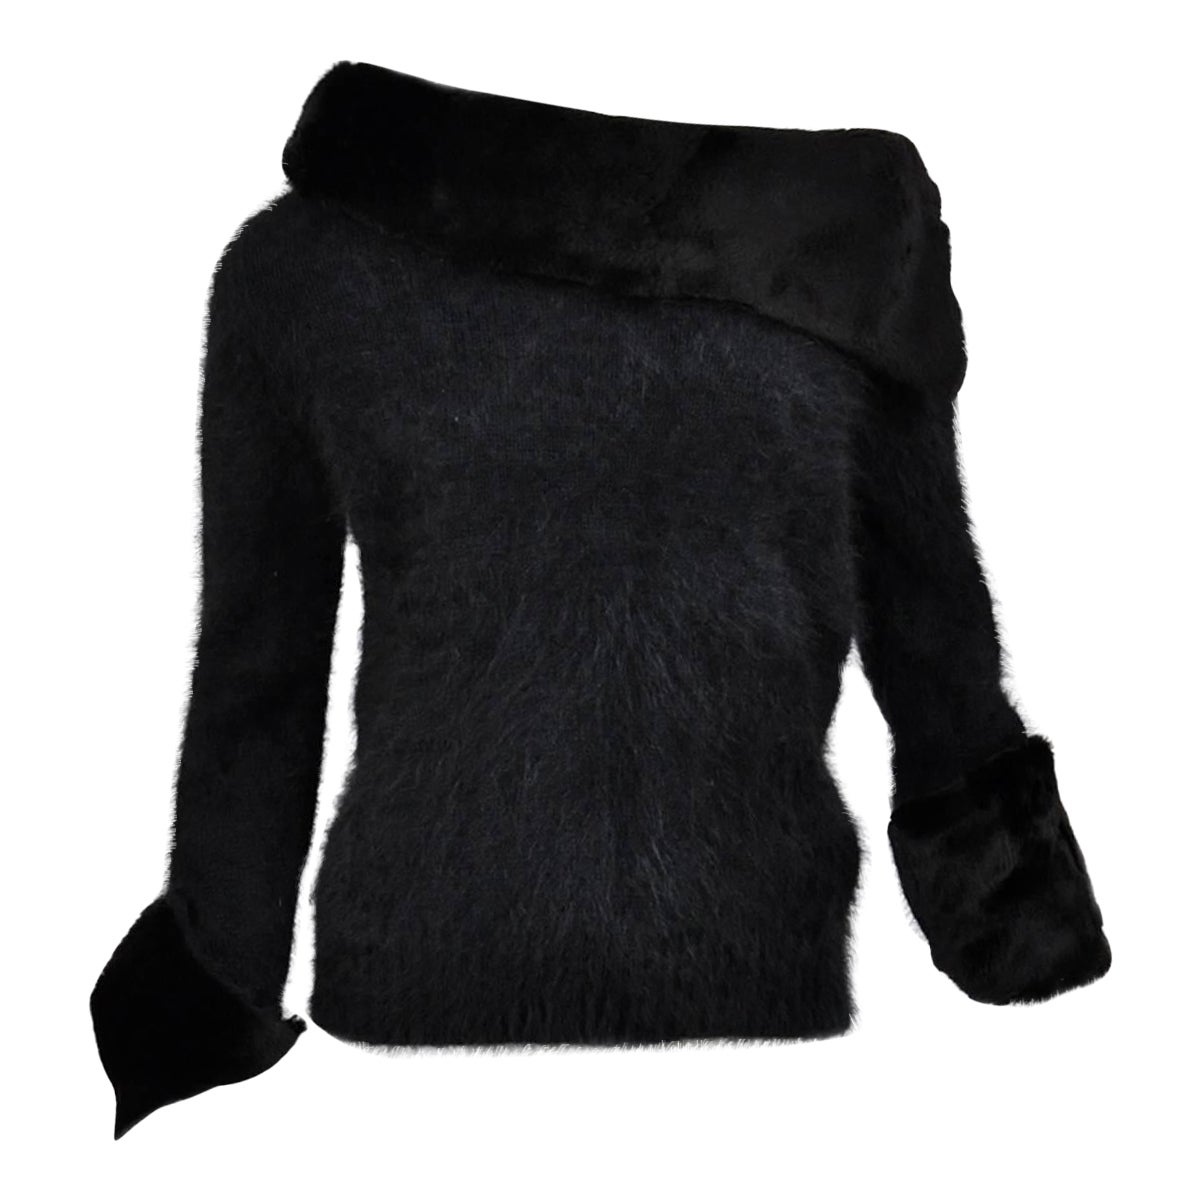 Tom Ford for Gucci Black Angora and Mink Fur Most Luxurious Sweater size S